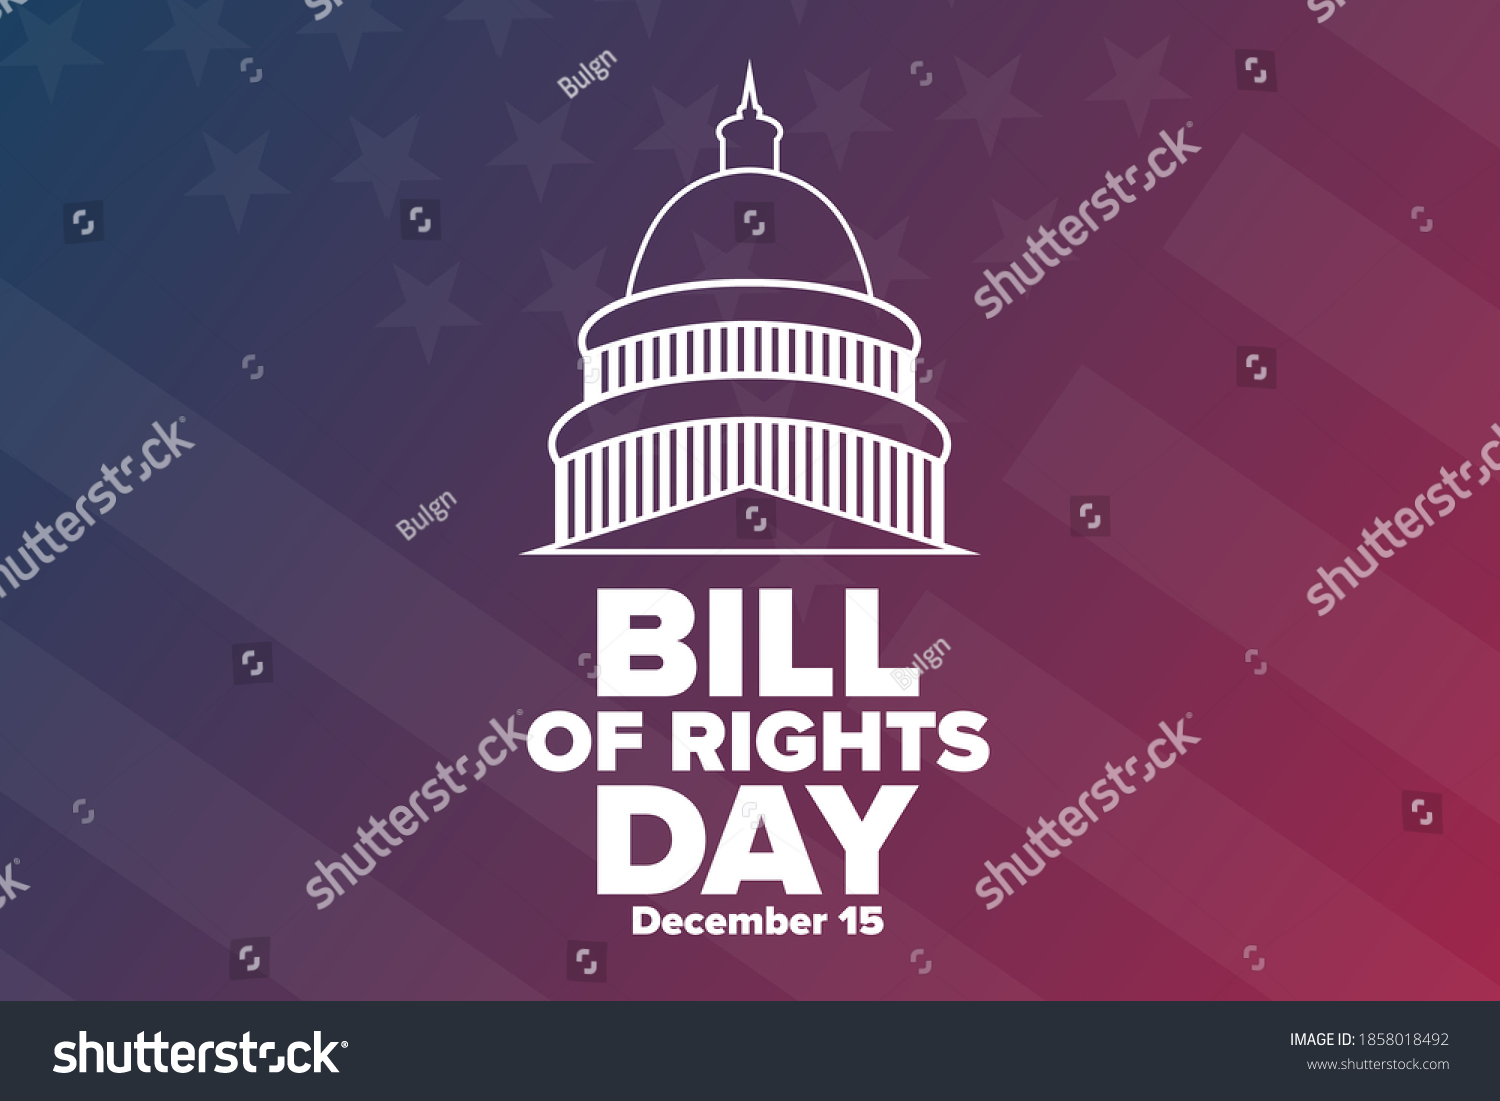 SVG of Bill of Rights Day. December 15. Holiday concept. Template for background, banner, card, poster with text inscription. Vector EPS10 illustration svg